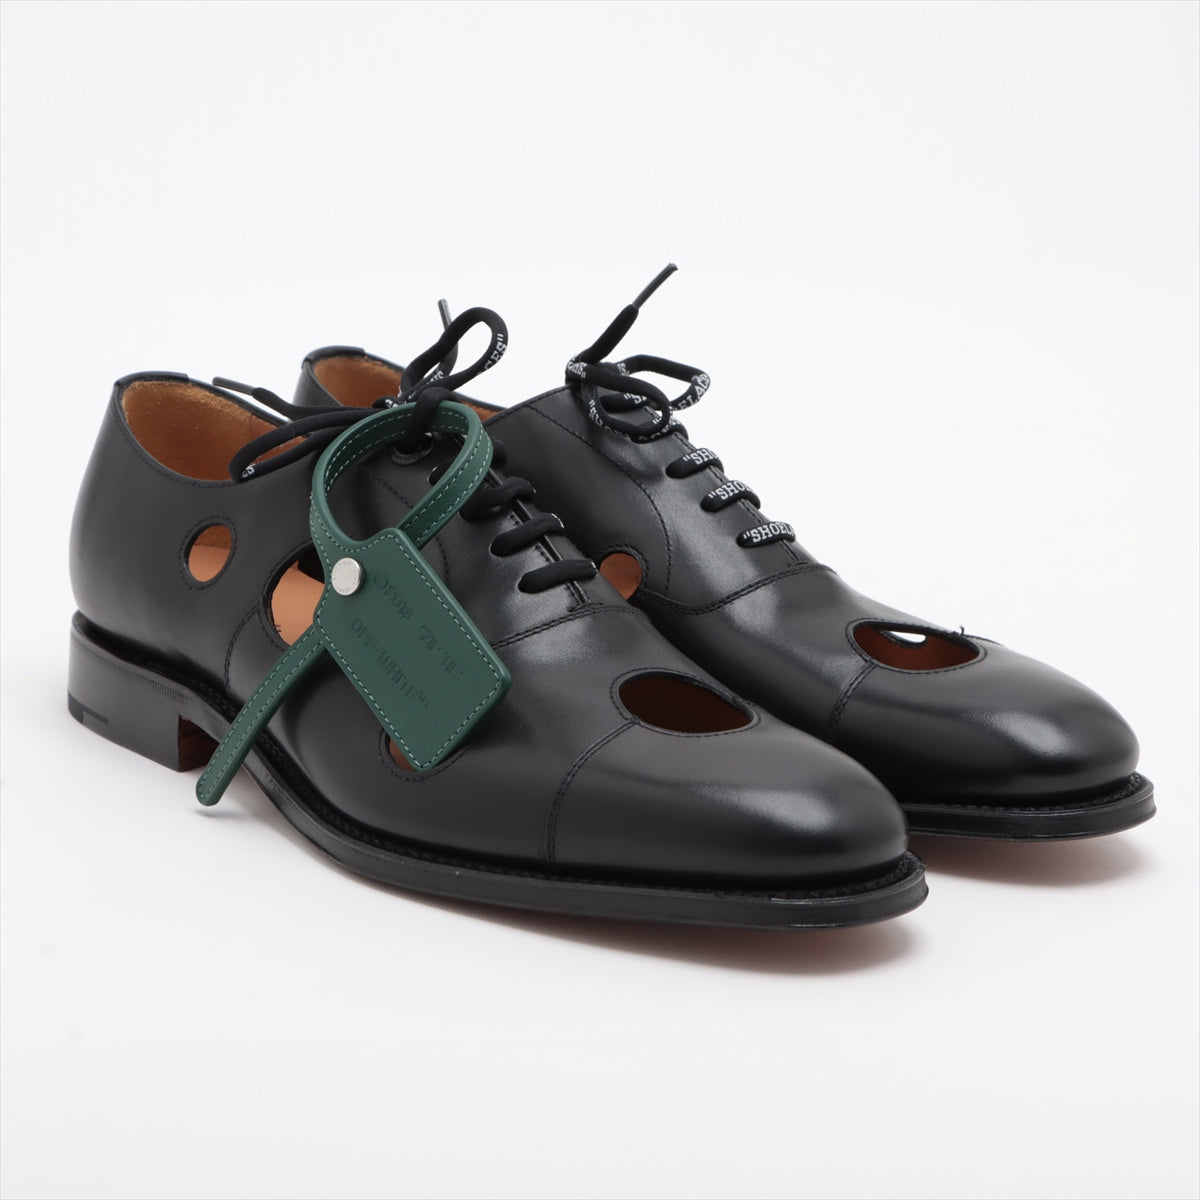 Church x off-white Leather Leather shoes 9 1/2 Men's Black Consulting Meteor Straight tip  Replacement Laces Included